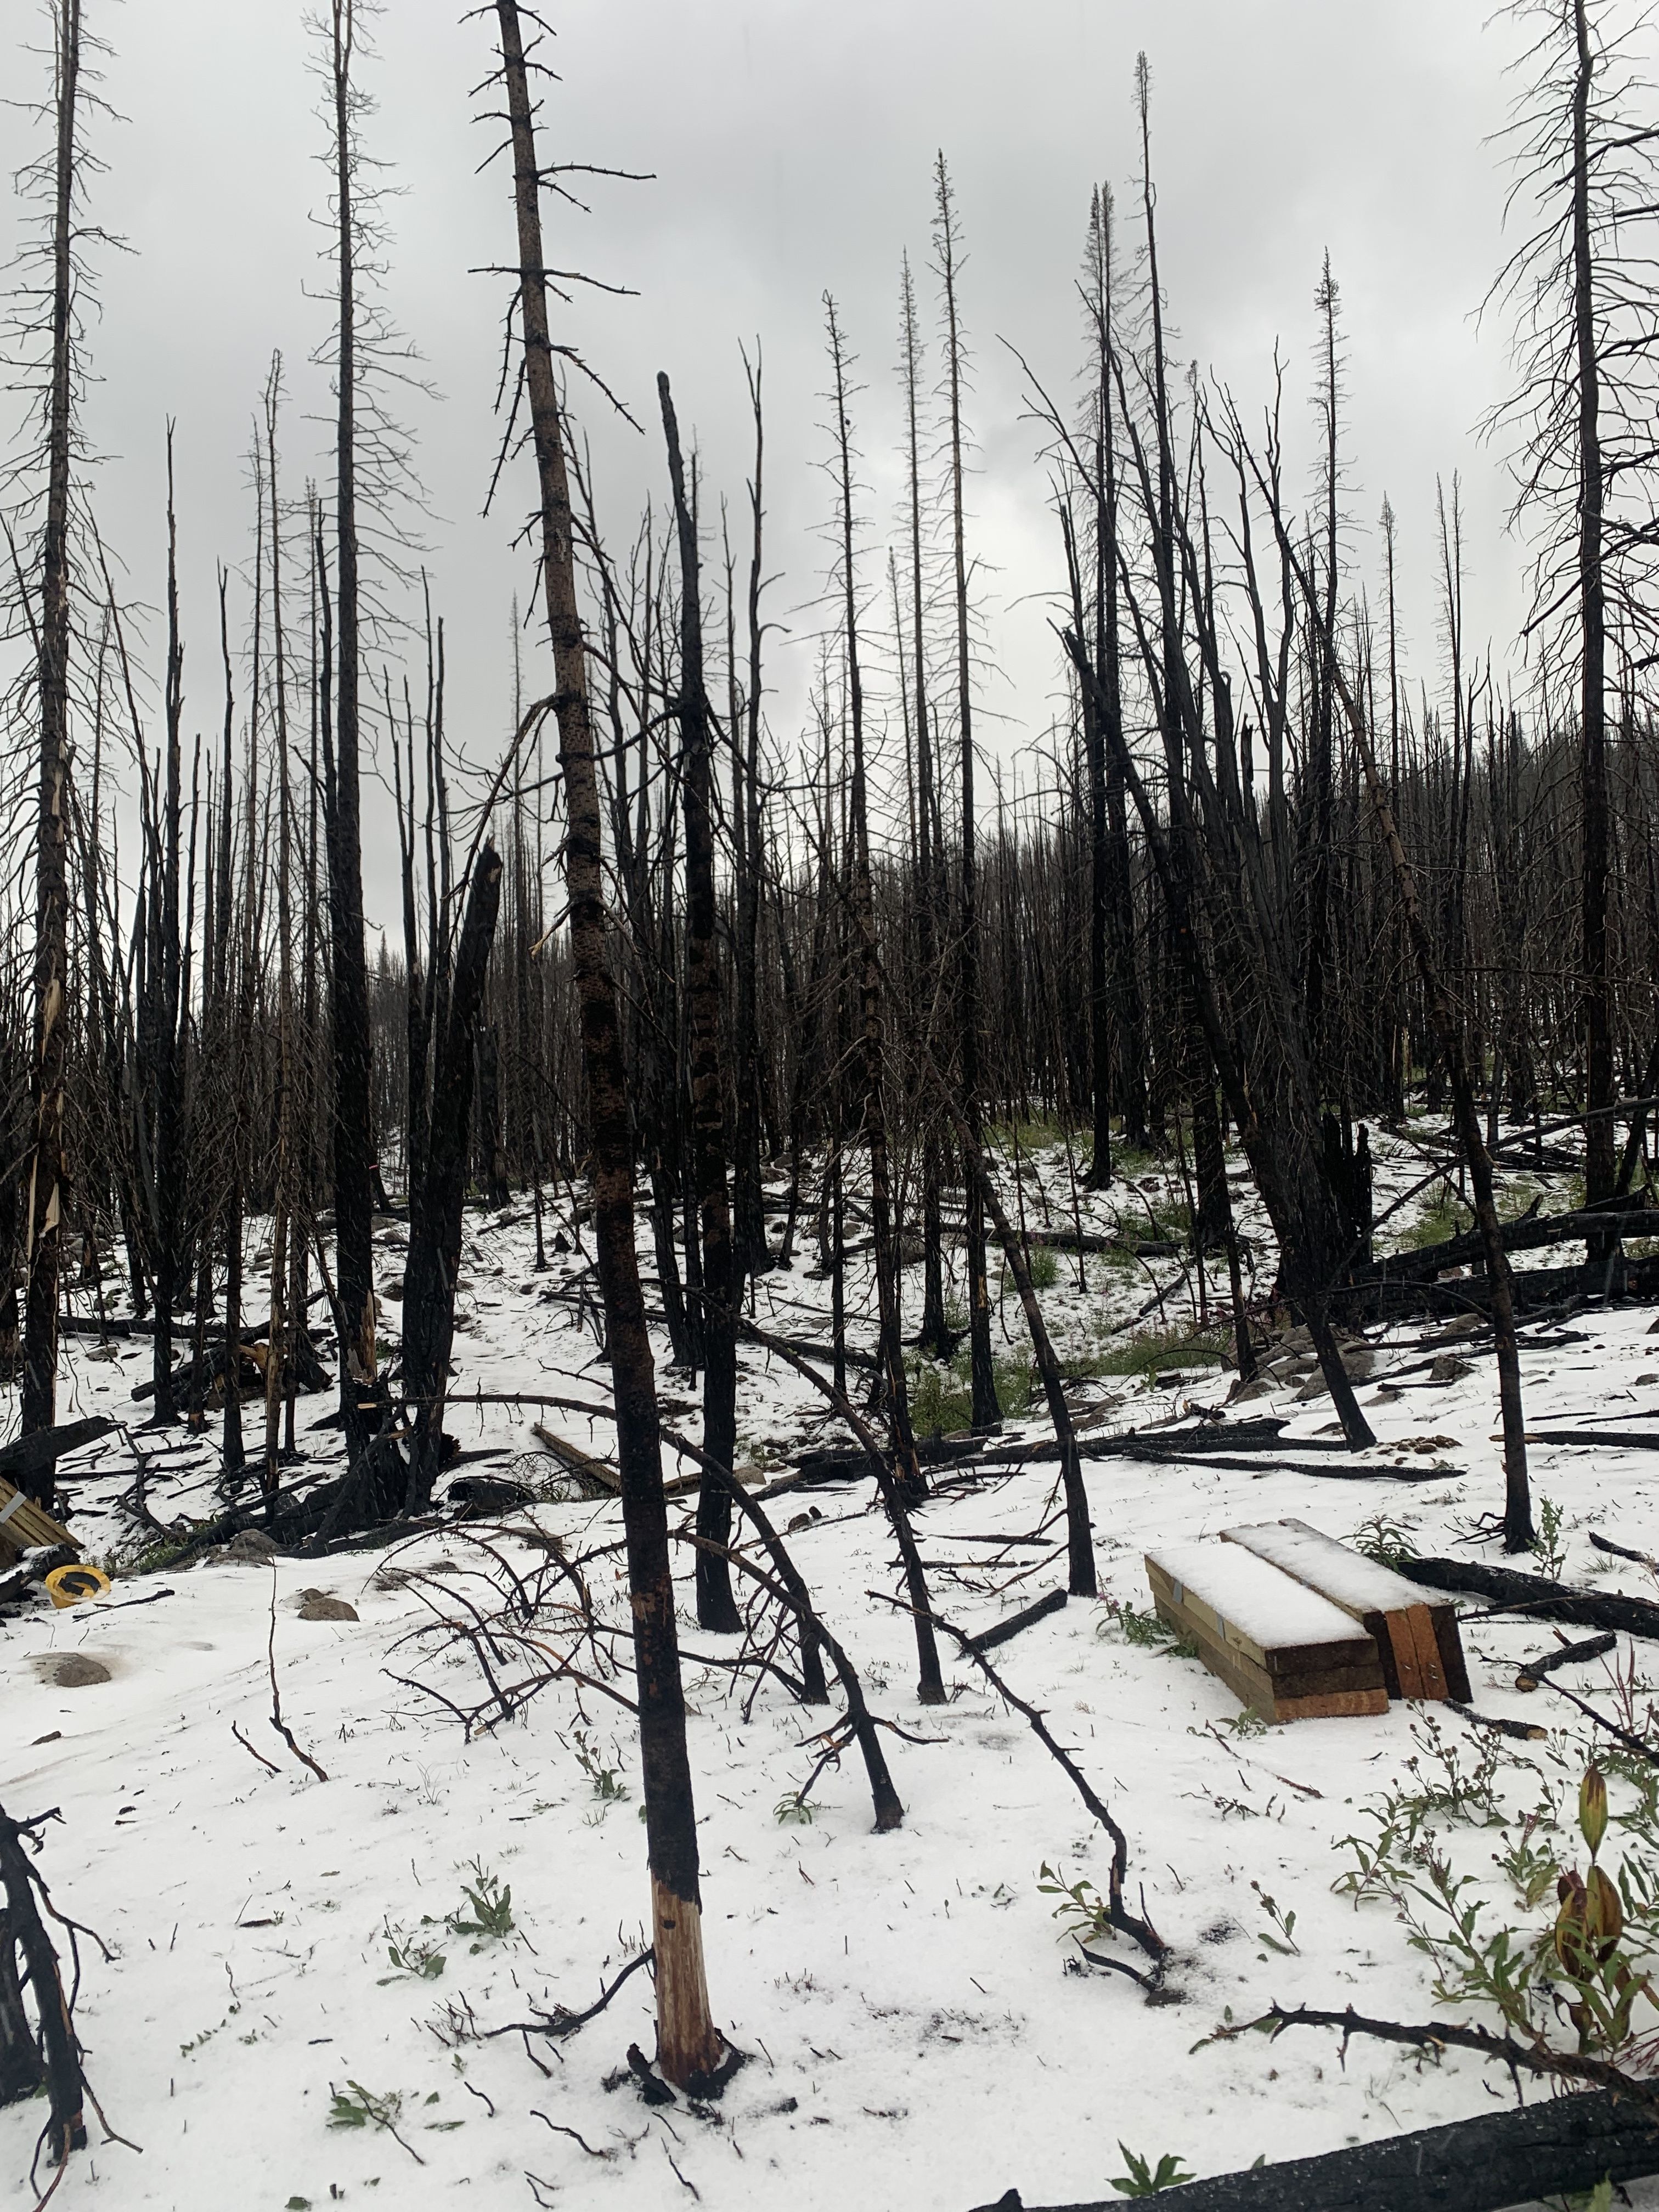 A scene of snow on the ground within an area with burned trees.